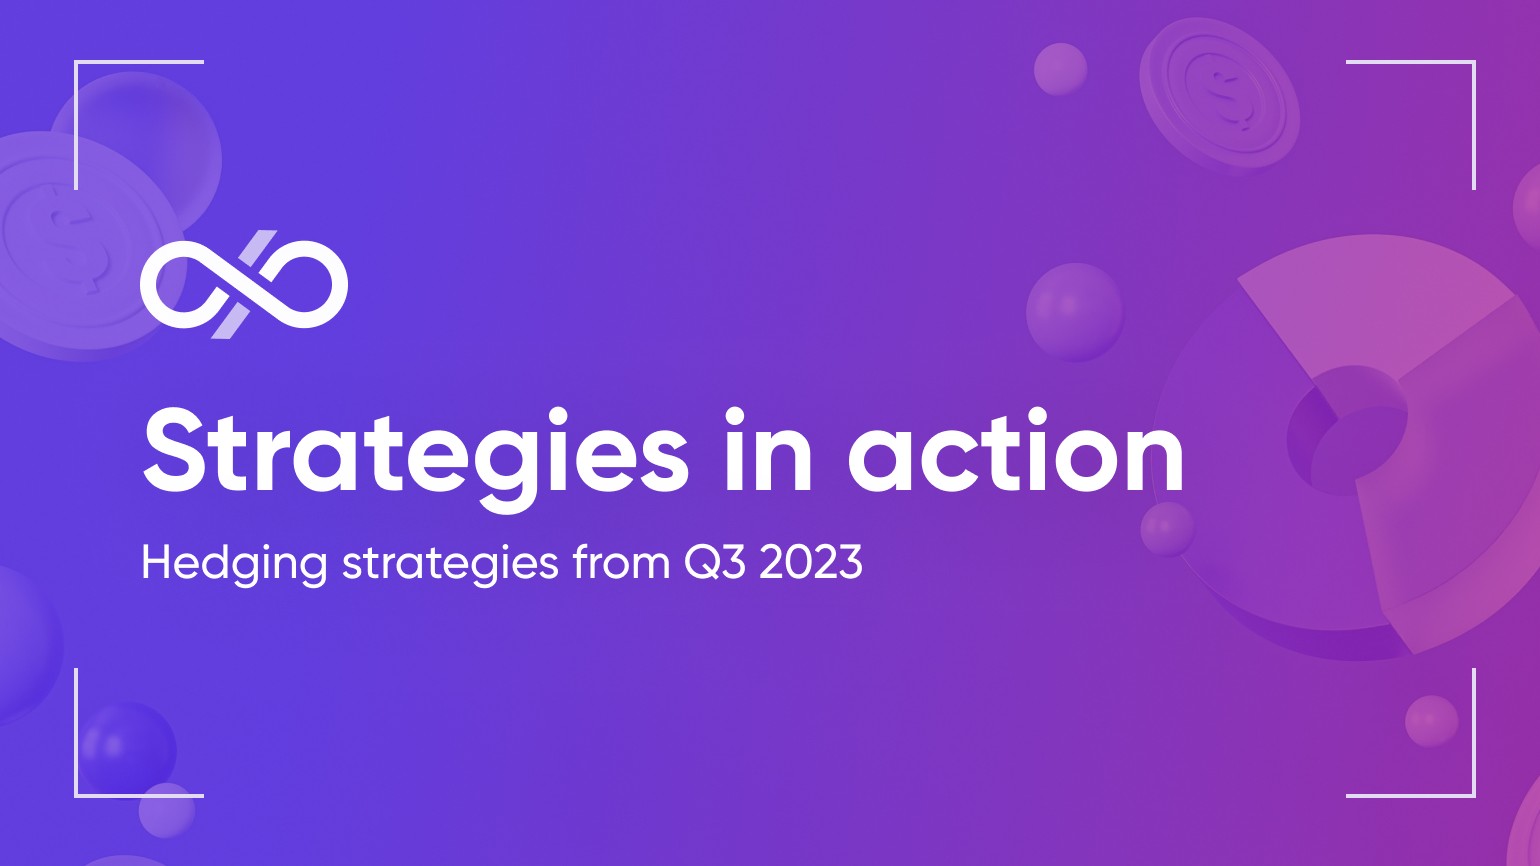 Hedging Strategies from Q3 2023